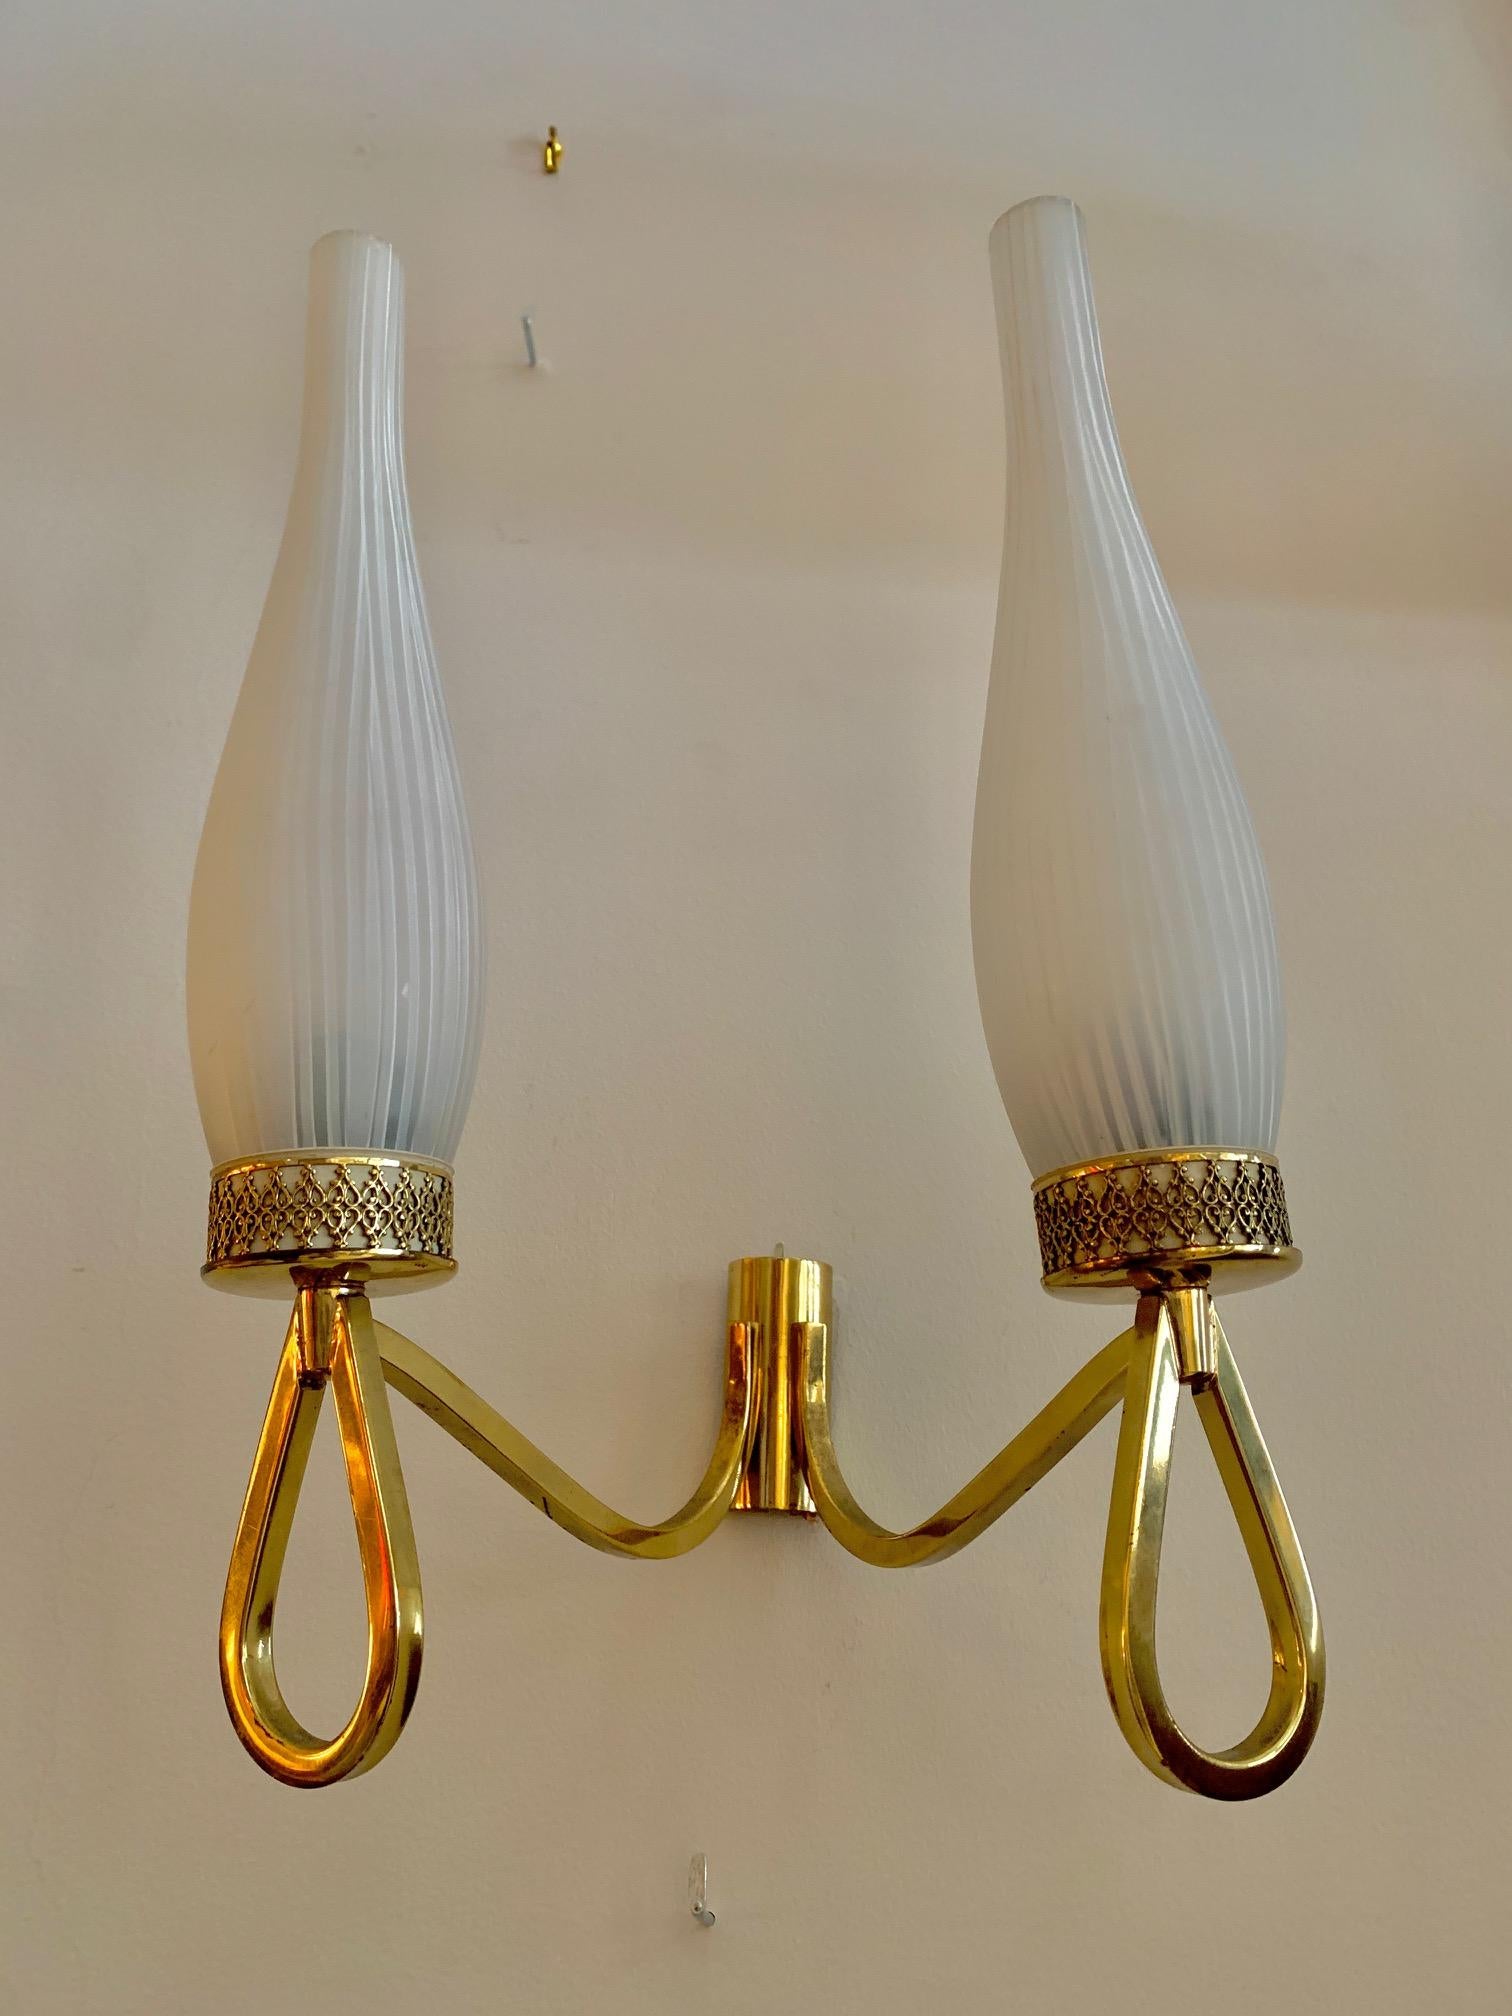 Pair of wall sconces around 1950, in the Maison Lunel style, with double arms, the entire structure is made of brass, the lampshades are original opaline glass. one of them have a small, almost priceless fault.